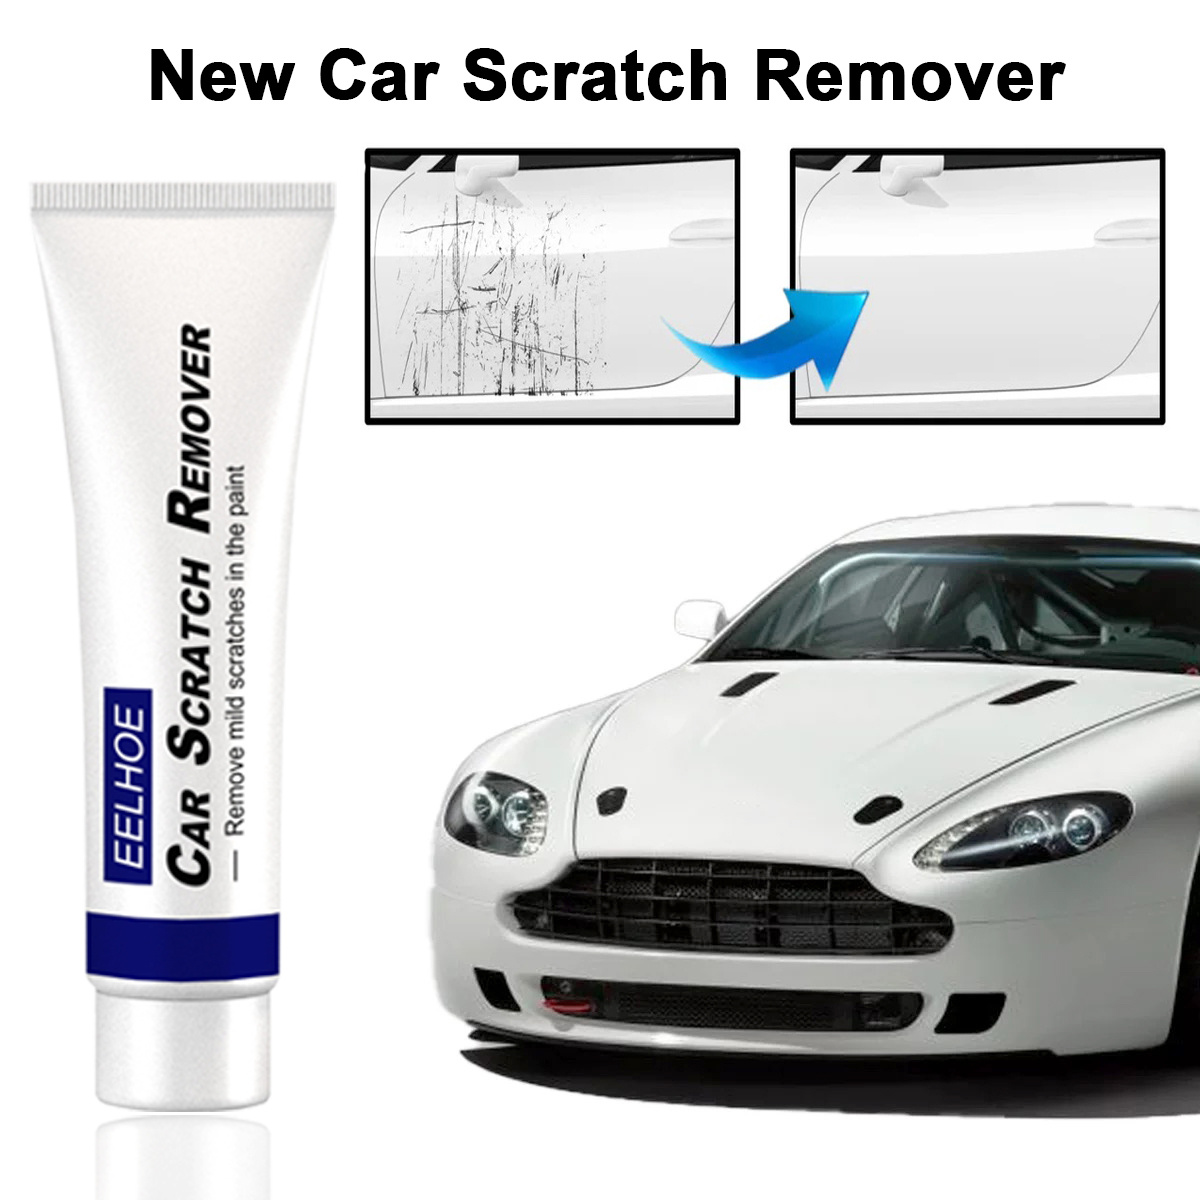 Car Scratch Repair Wax Kit With Polishing Compound, Paint Care